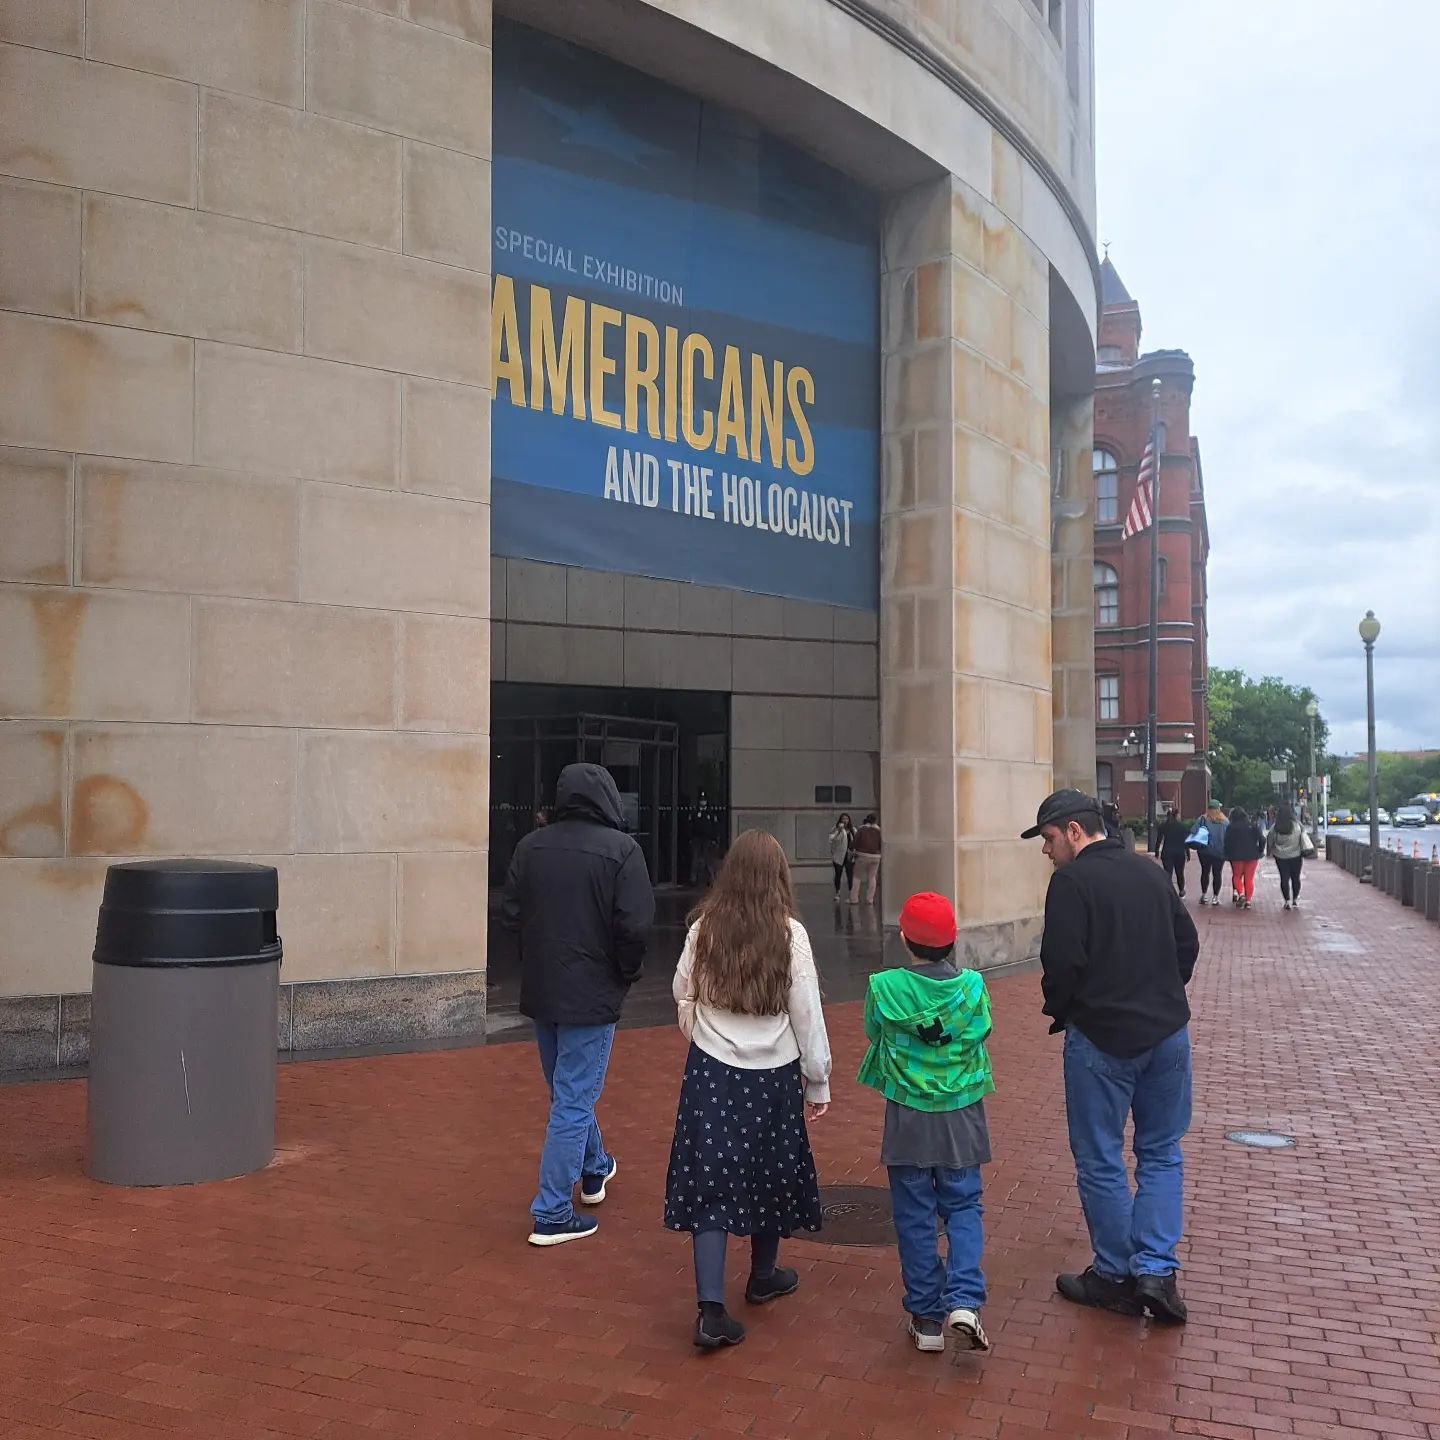 My husband and I recently took our kids to see the United States Holocaust Museum in D.C. We've been talking at home about how propaganda persuaded once-good people toward evil. How words and shifting attitudes became open, unapologetic crimes. Unfor